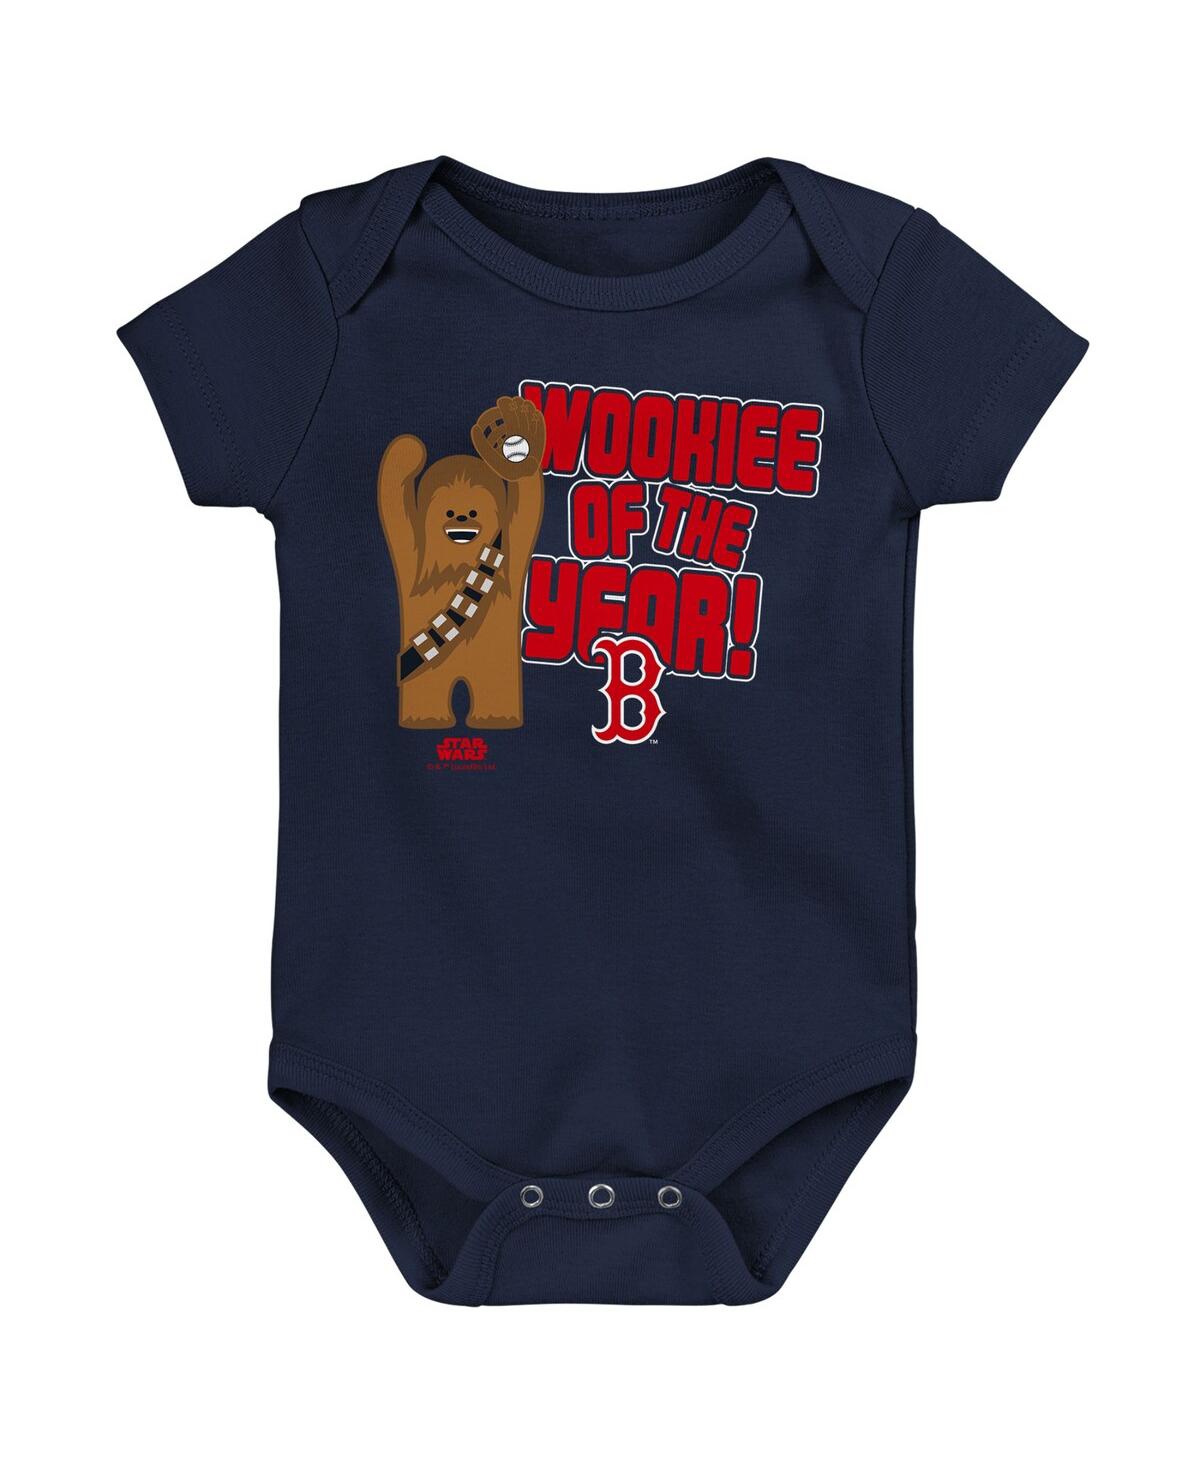 Outerstuff Babies' Newborn And Infant Boys And Girls Navy Boston Red Sox Star Wars Wookie Of The Year Bodysuit